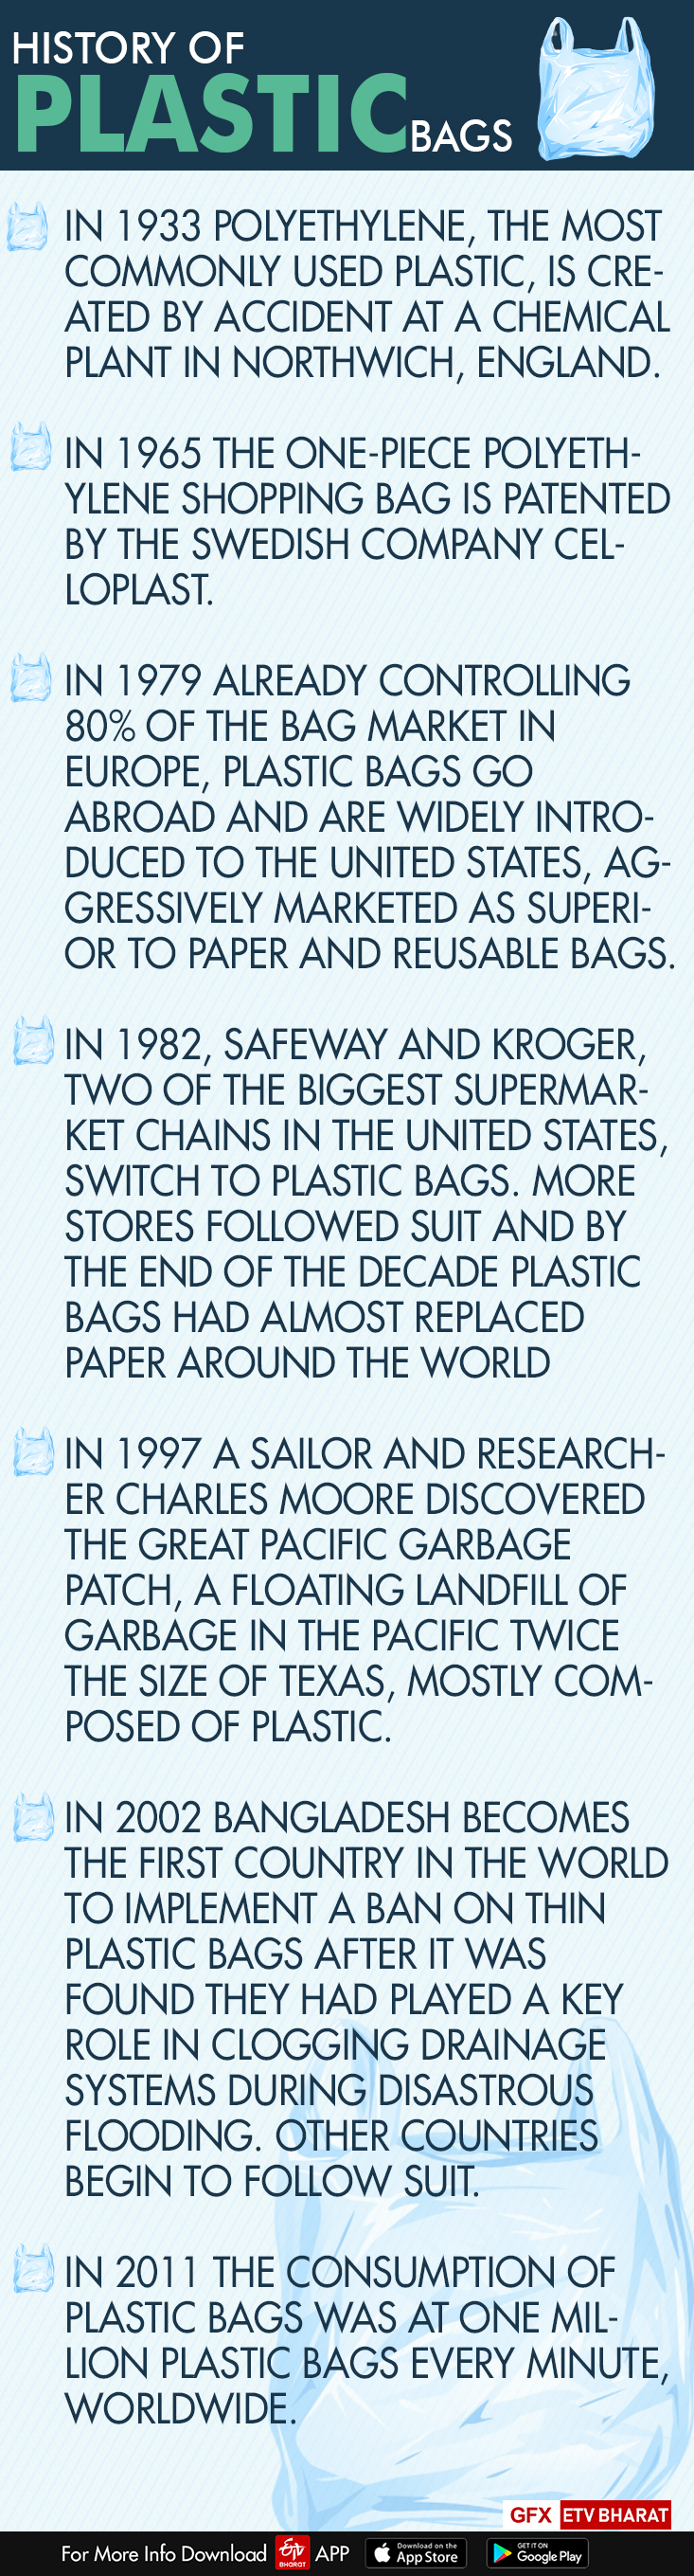 History of plastic bags